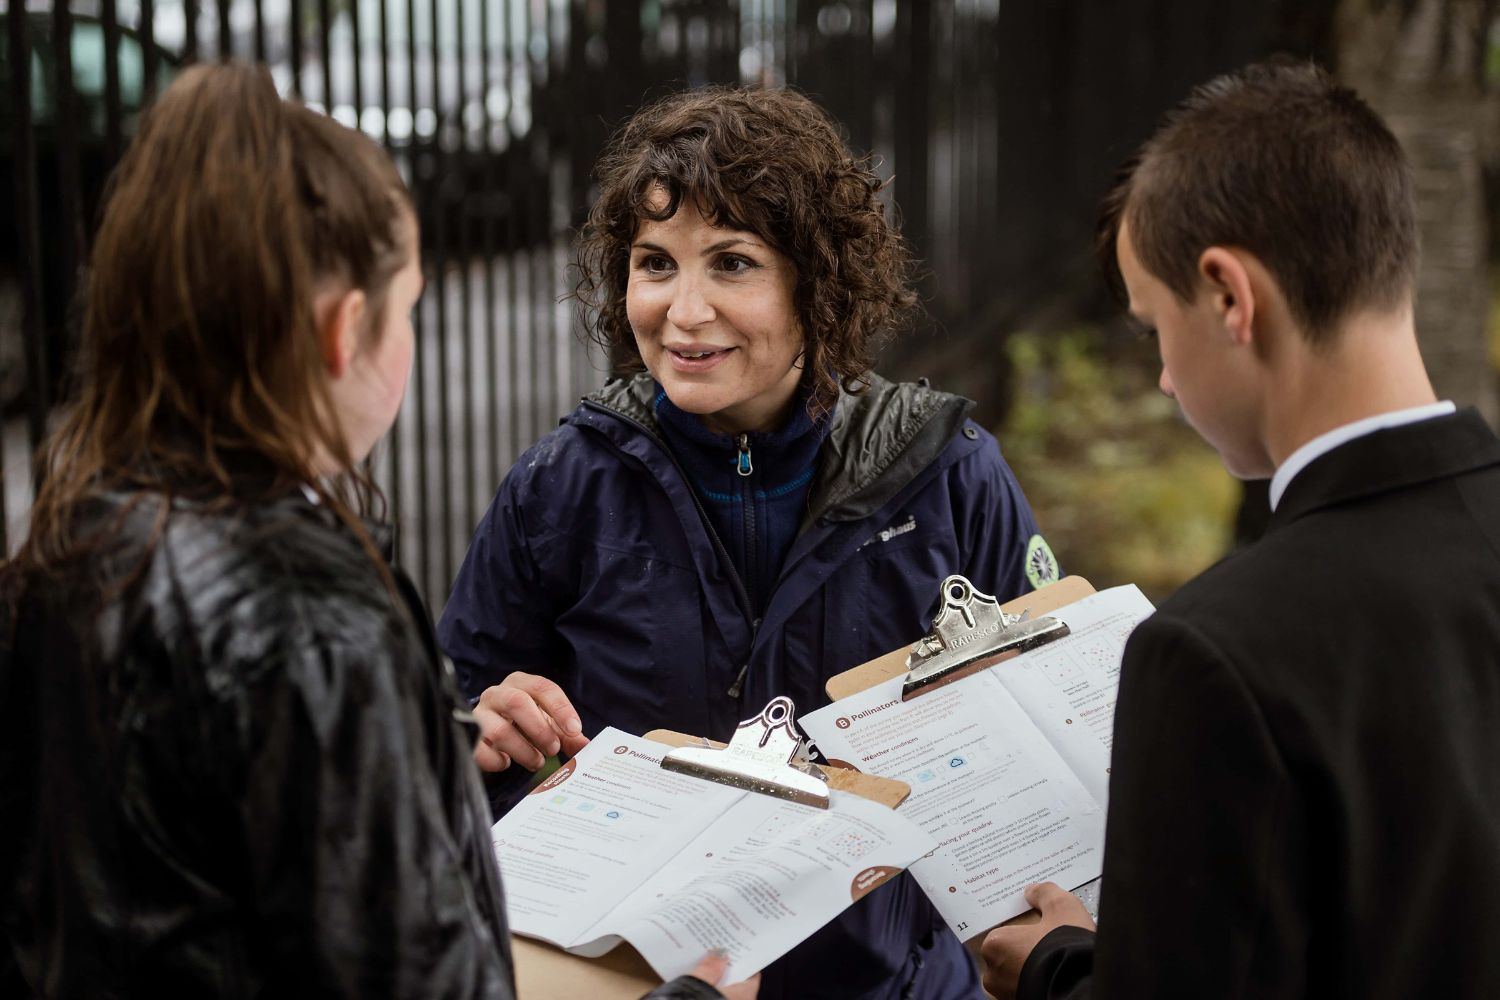 A teacher and two teenagers look at checklists on clipboards working together outdoors.